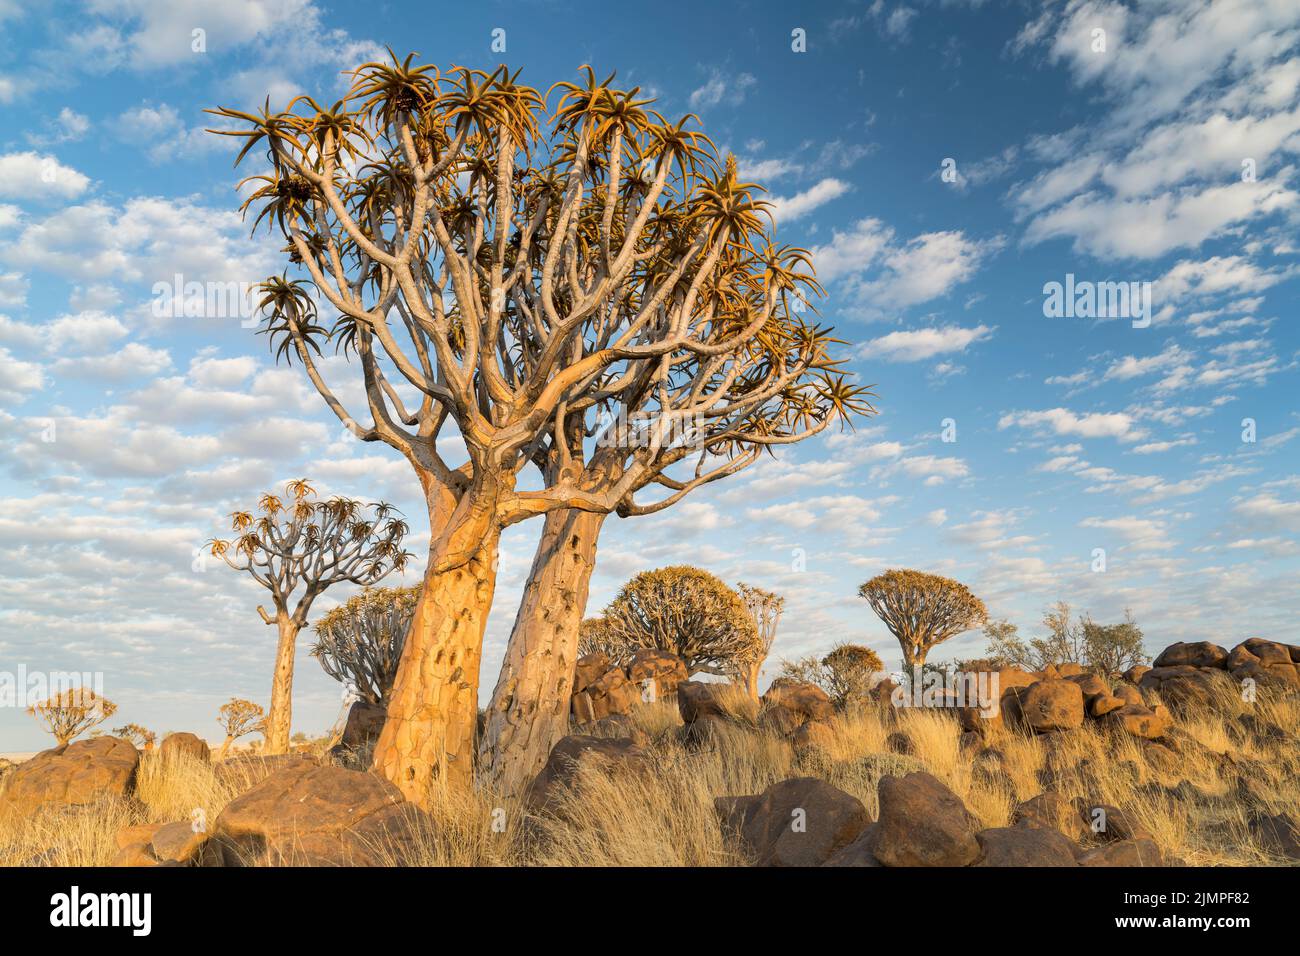 landscape of quiver trees growing among boulders on the ground, Namibia Stock Photo